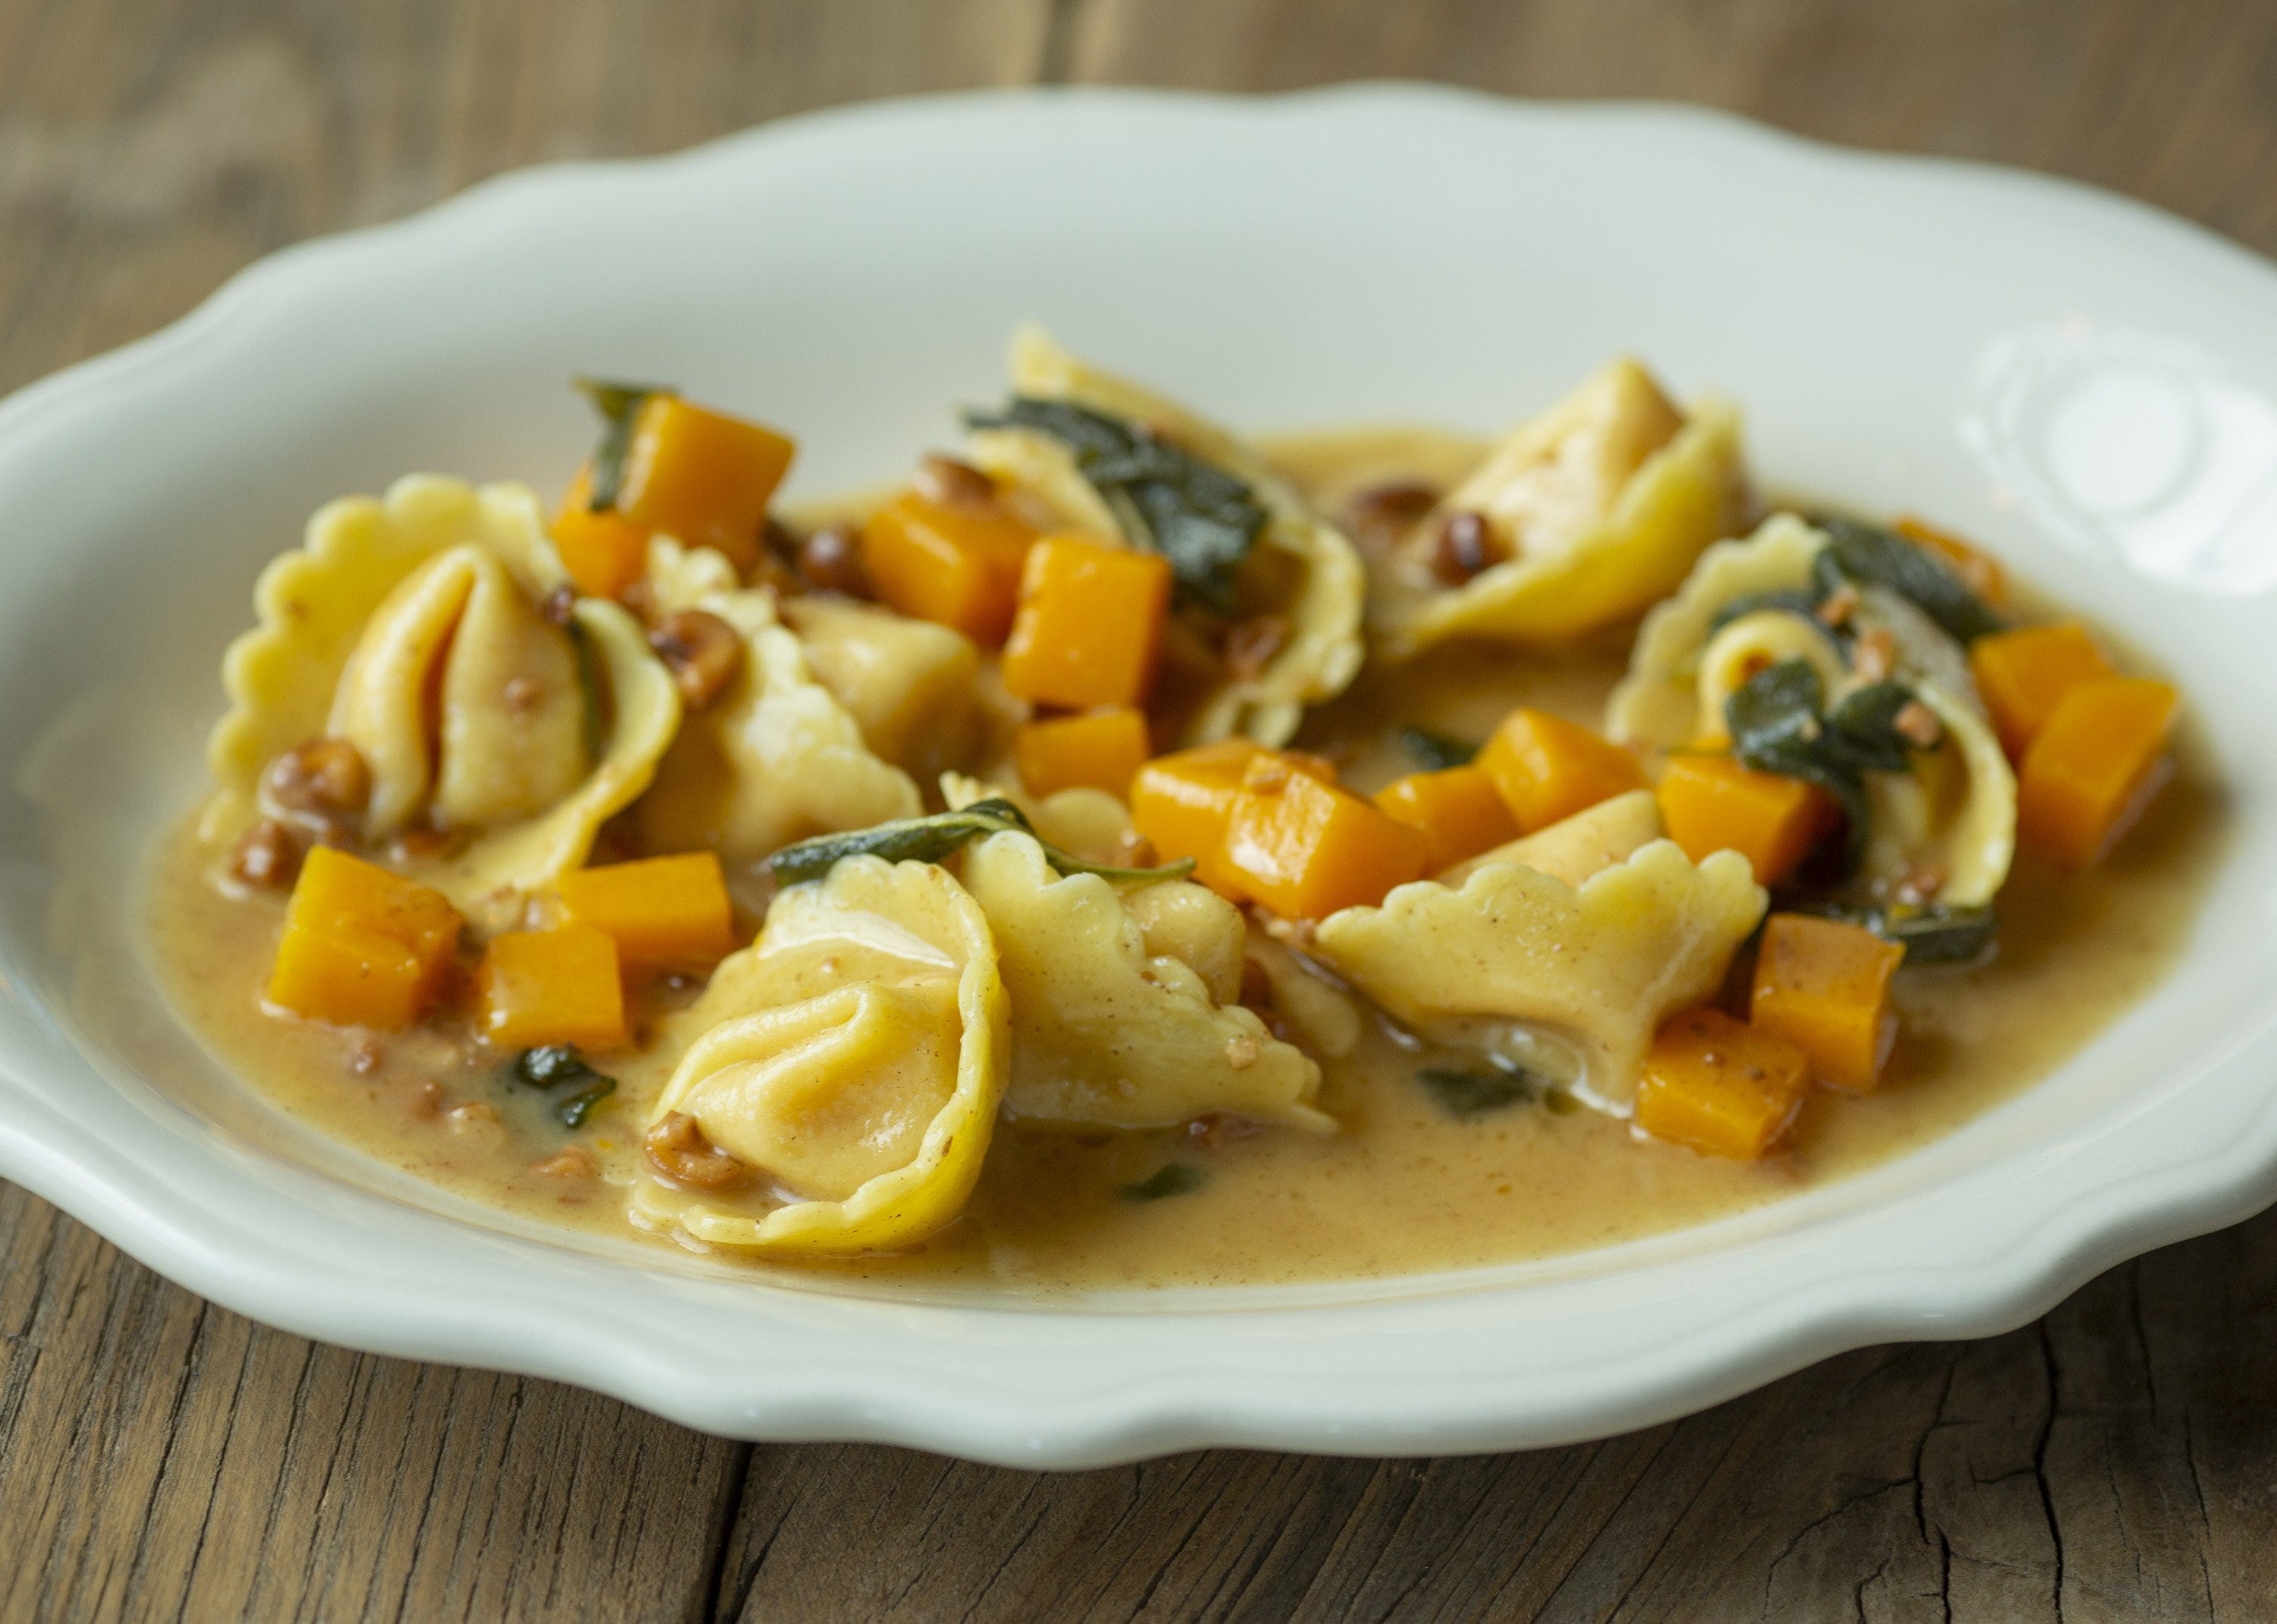 Fall squash cappellacci with sage brown butter and toasted hazelnuts from chef Matthew Phelan was on the menu Nov. 17 at the Novella Osteria restaurant in Powell.